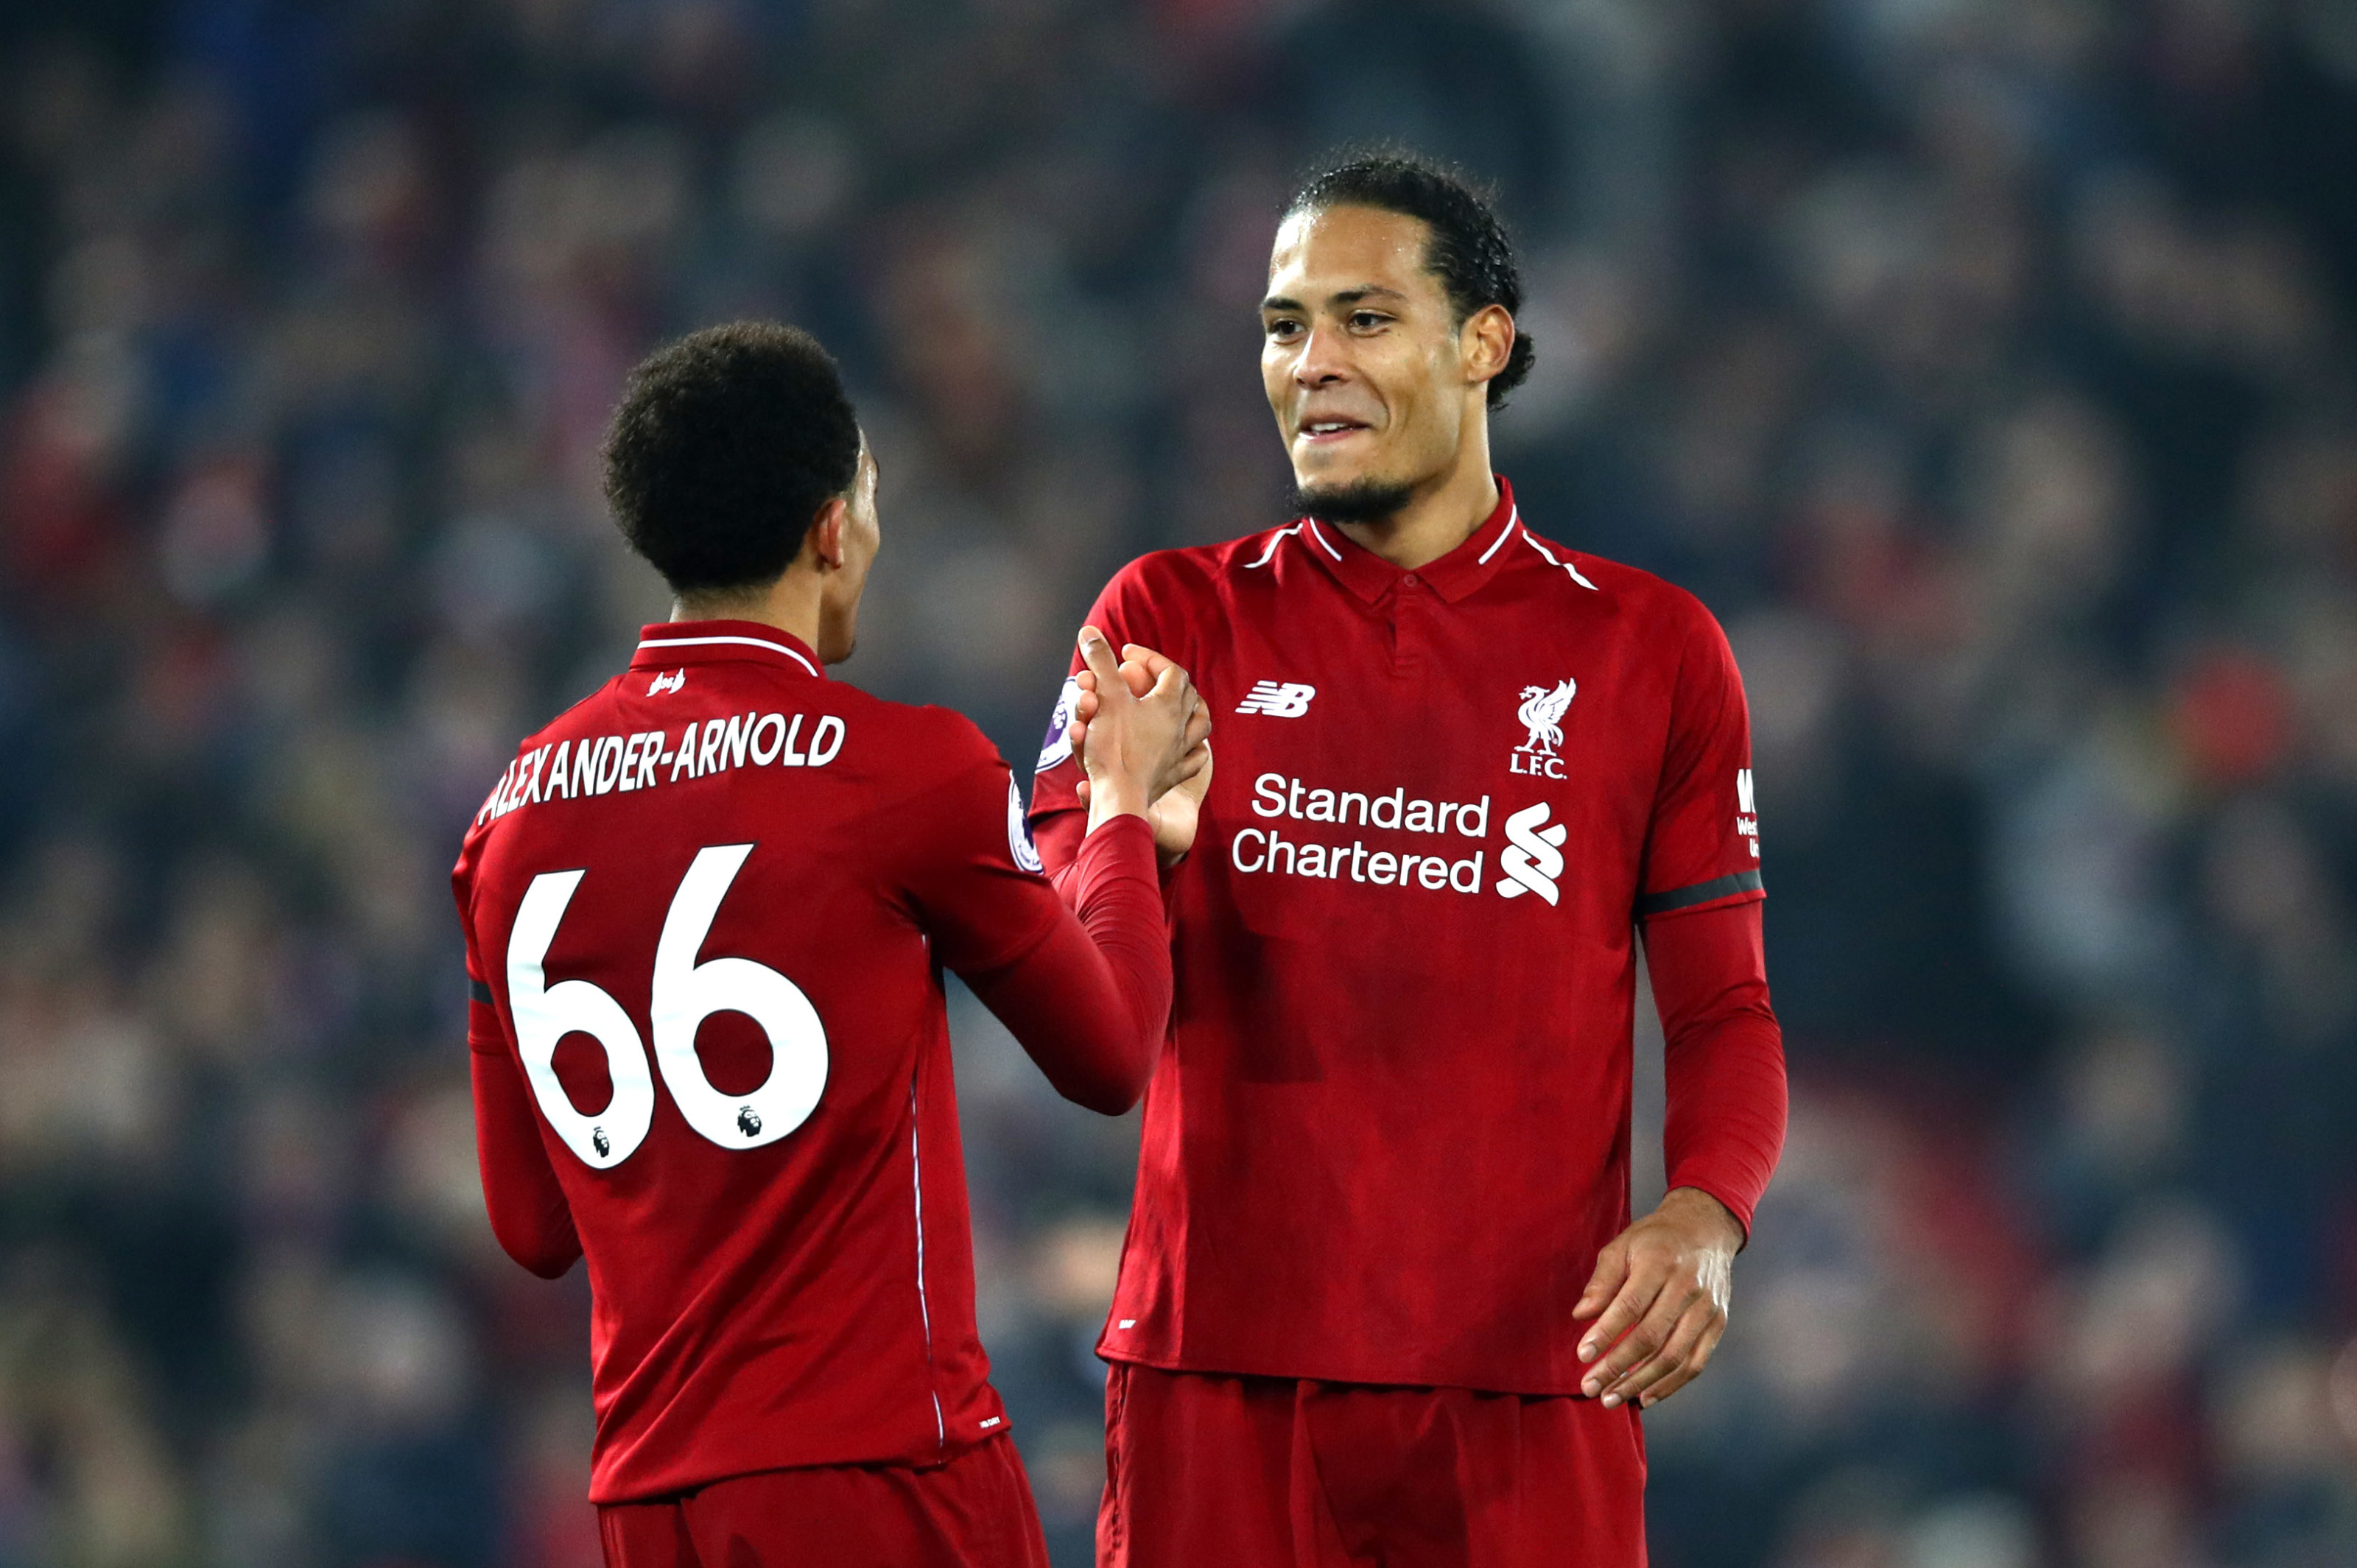 Virgil van Dijk and Trent Alexander-Arnold are the new captain and vice-captain of Liverpool respectively.